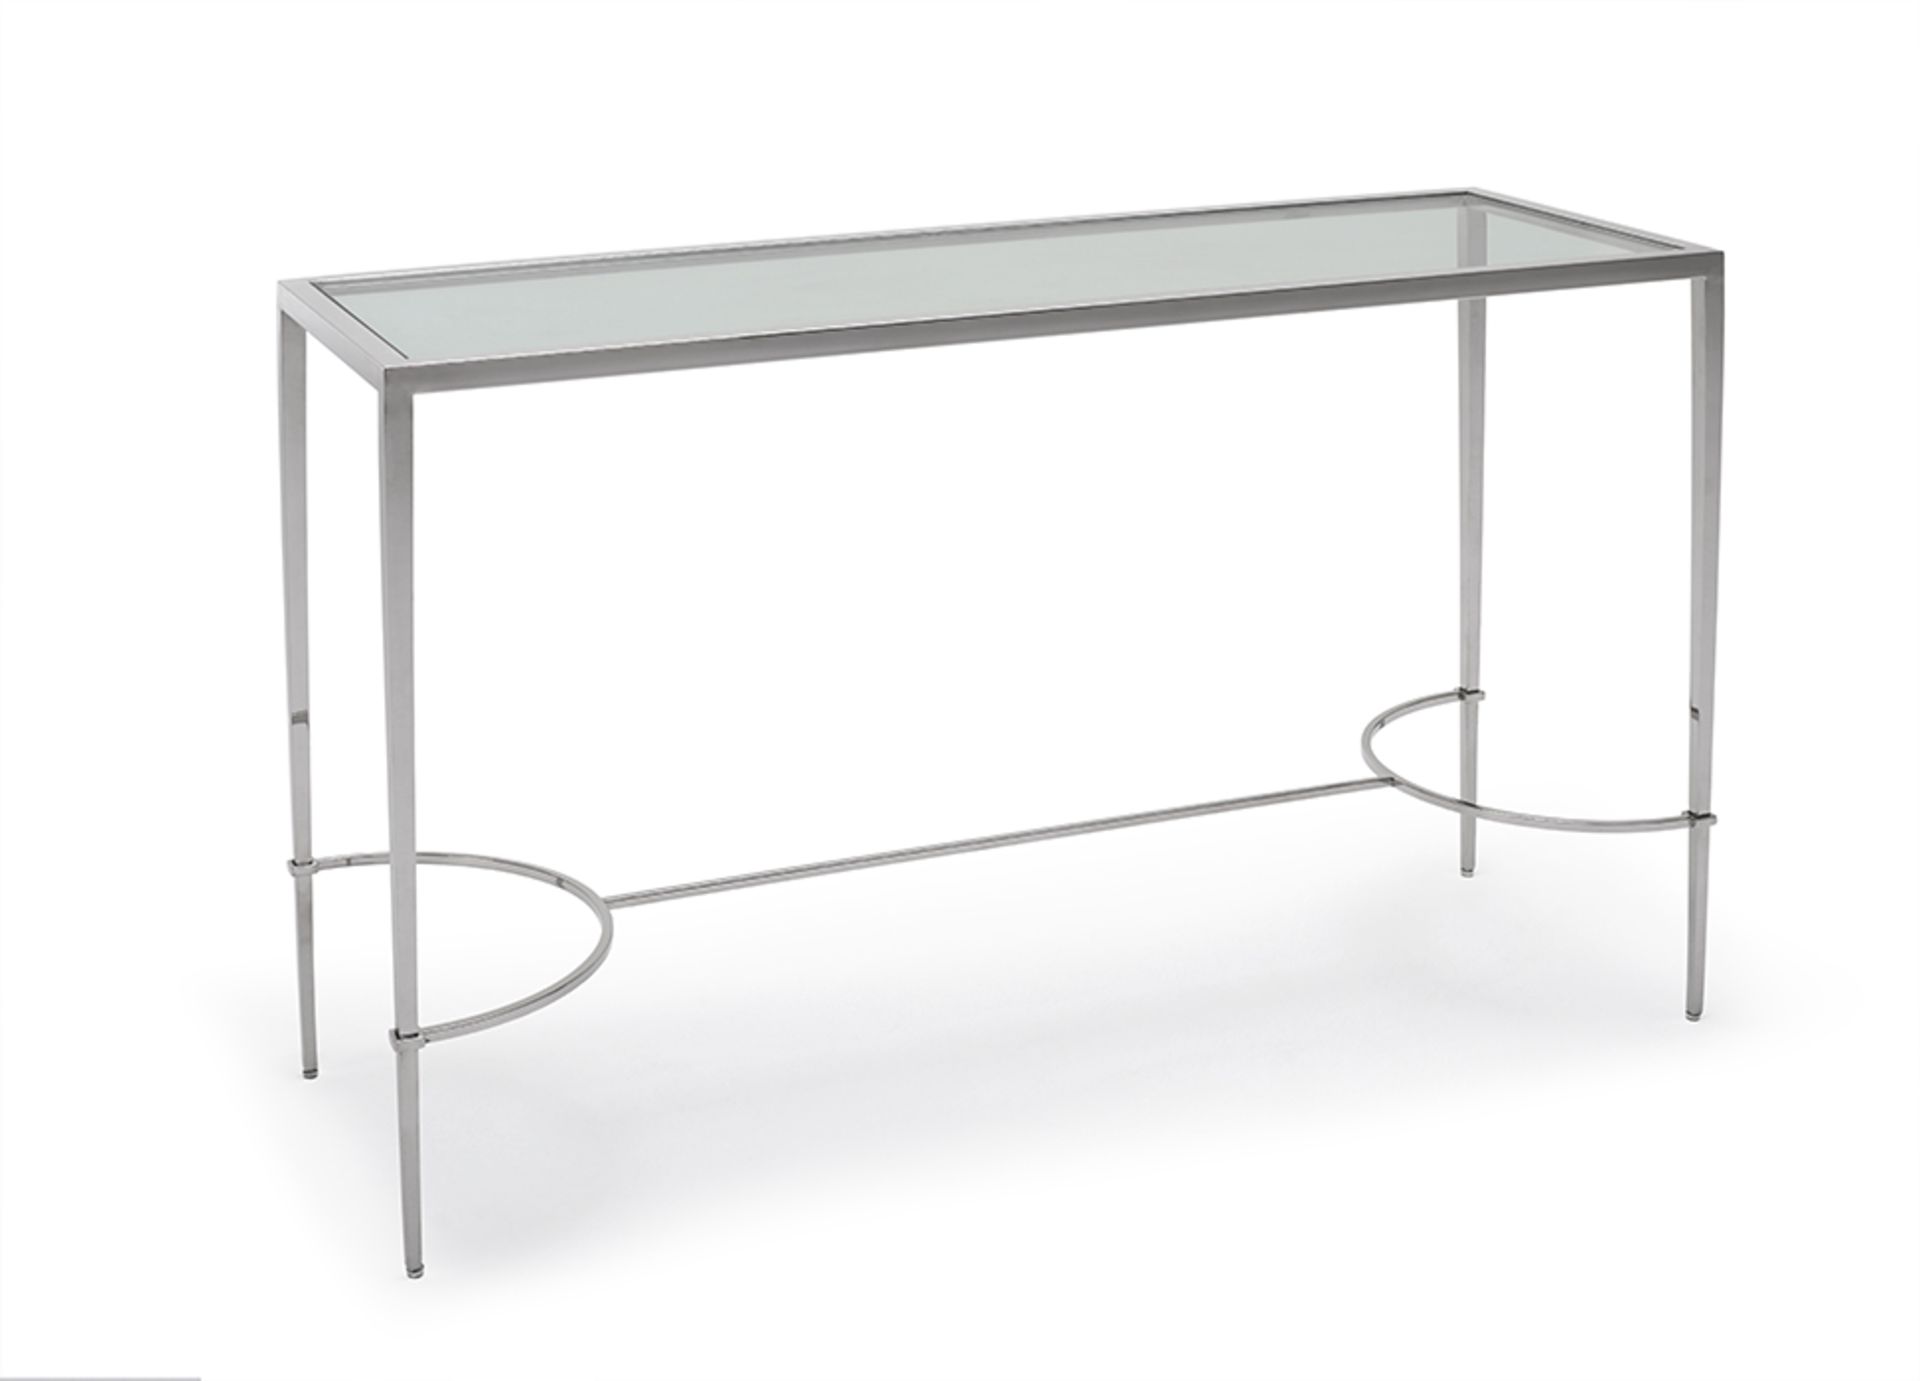 Tokyo Console Table by Kesterport The Tokyo console table with its clear glass top and a refined - Bild 6 aus 6